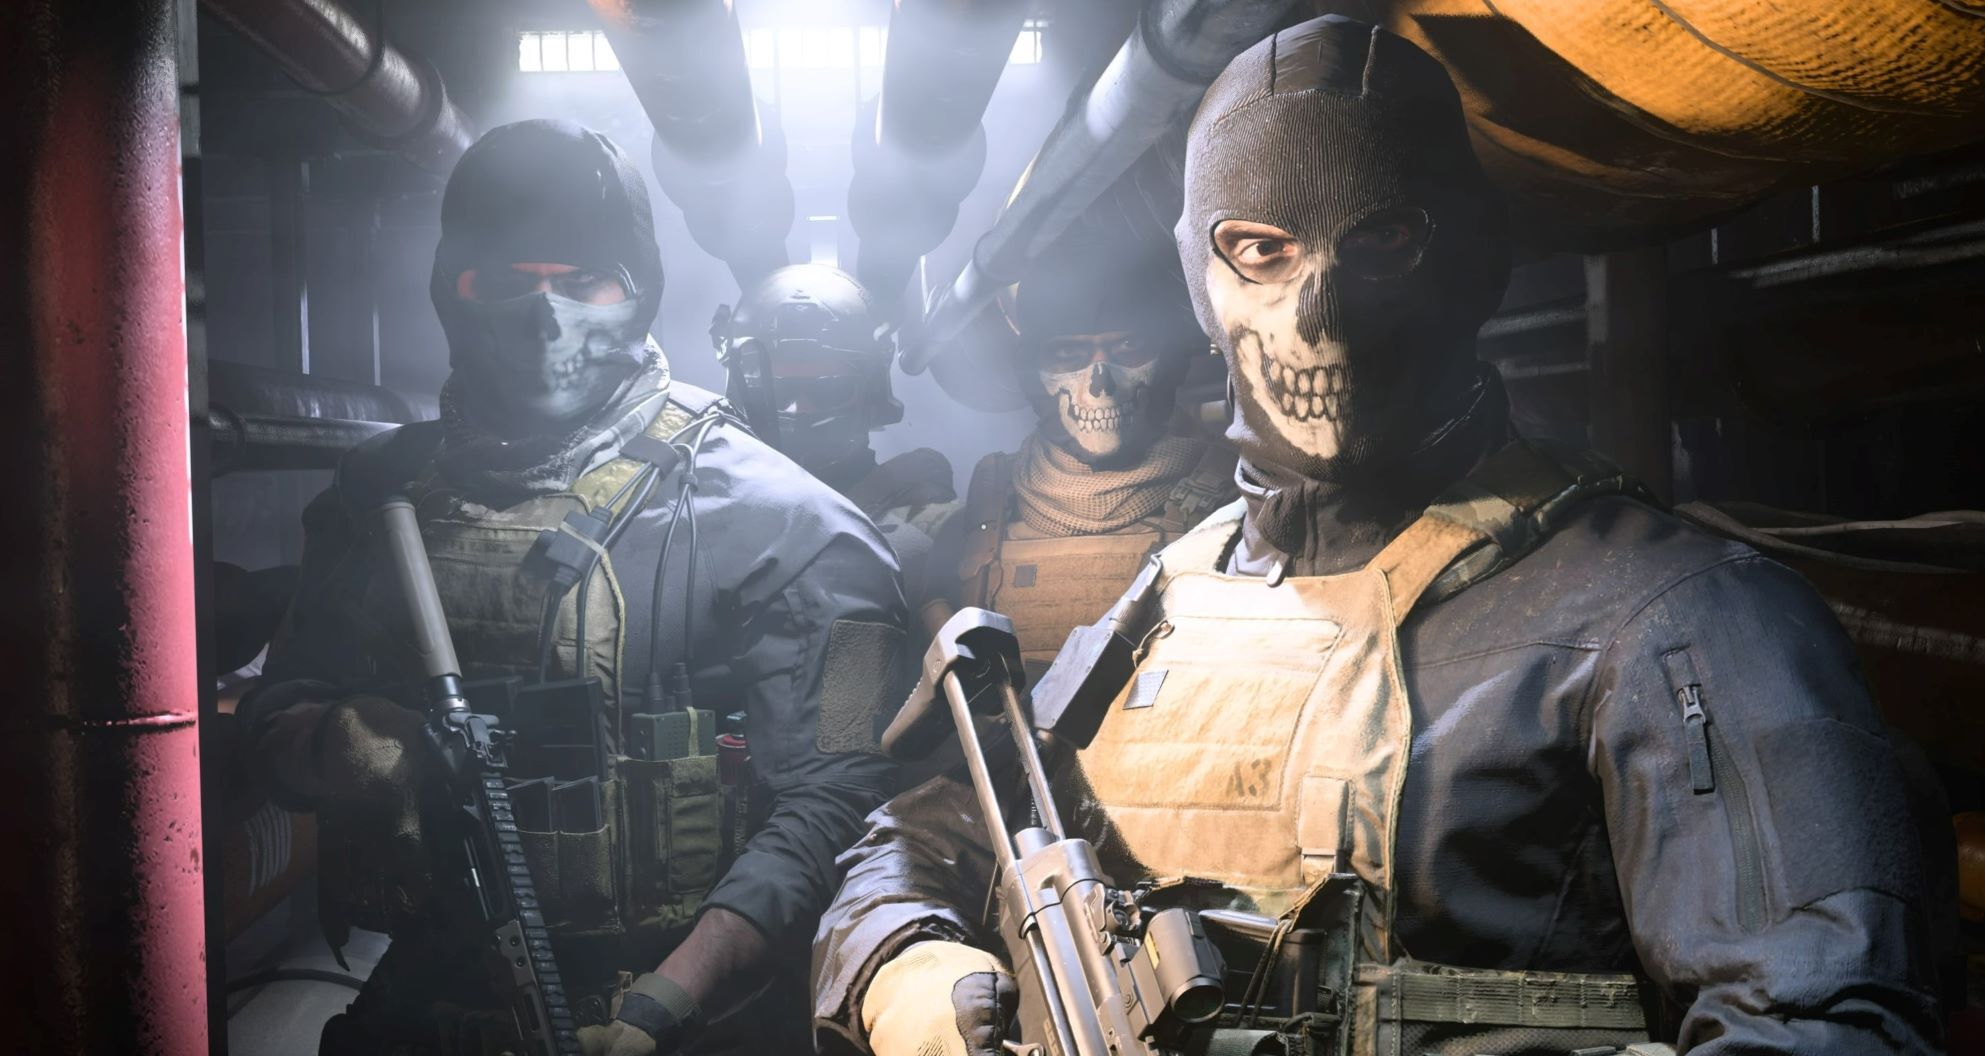 Call of Duty: Modern Warfare' Has Nothing Interesting to Say